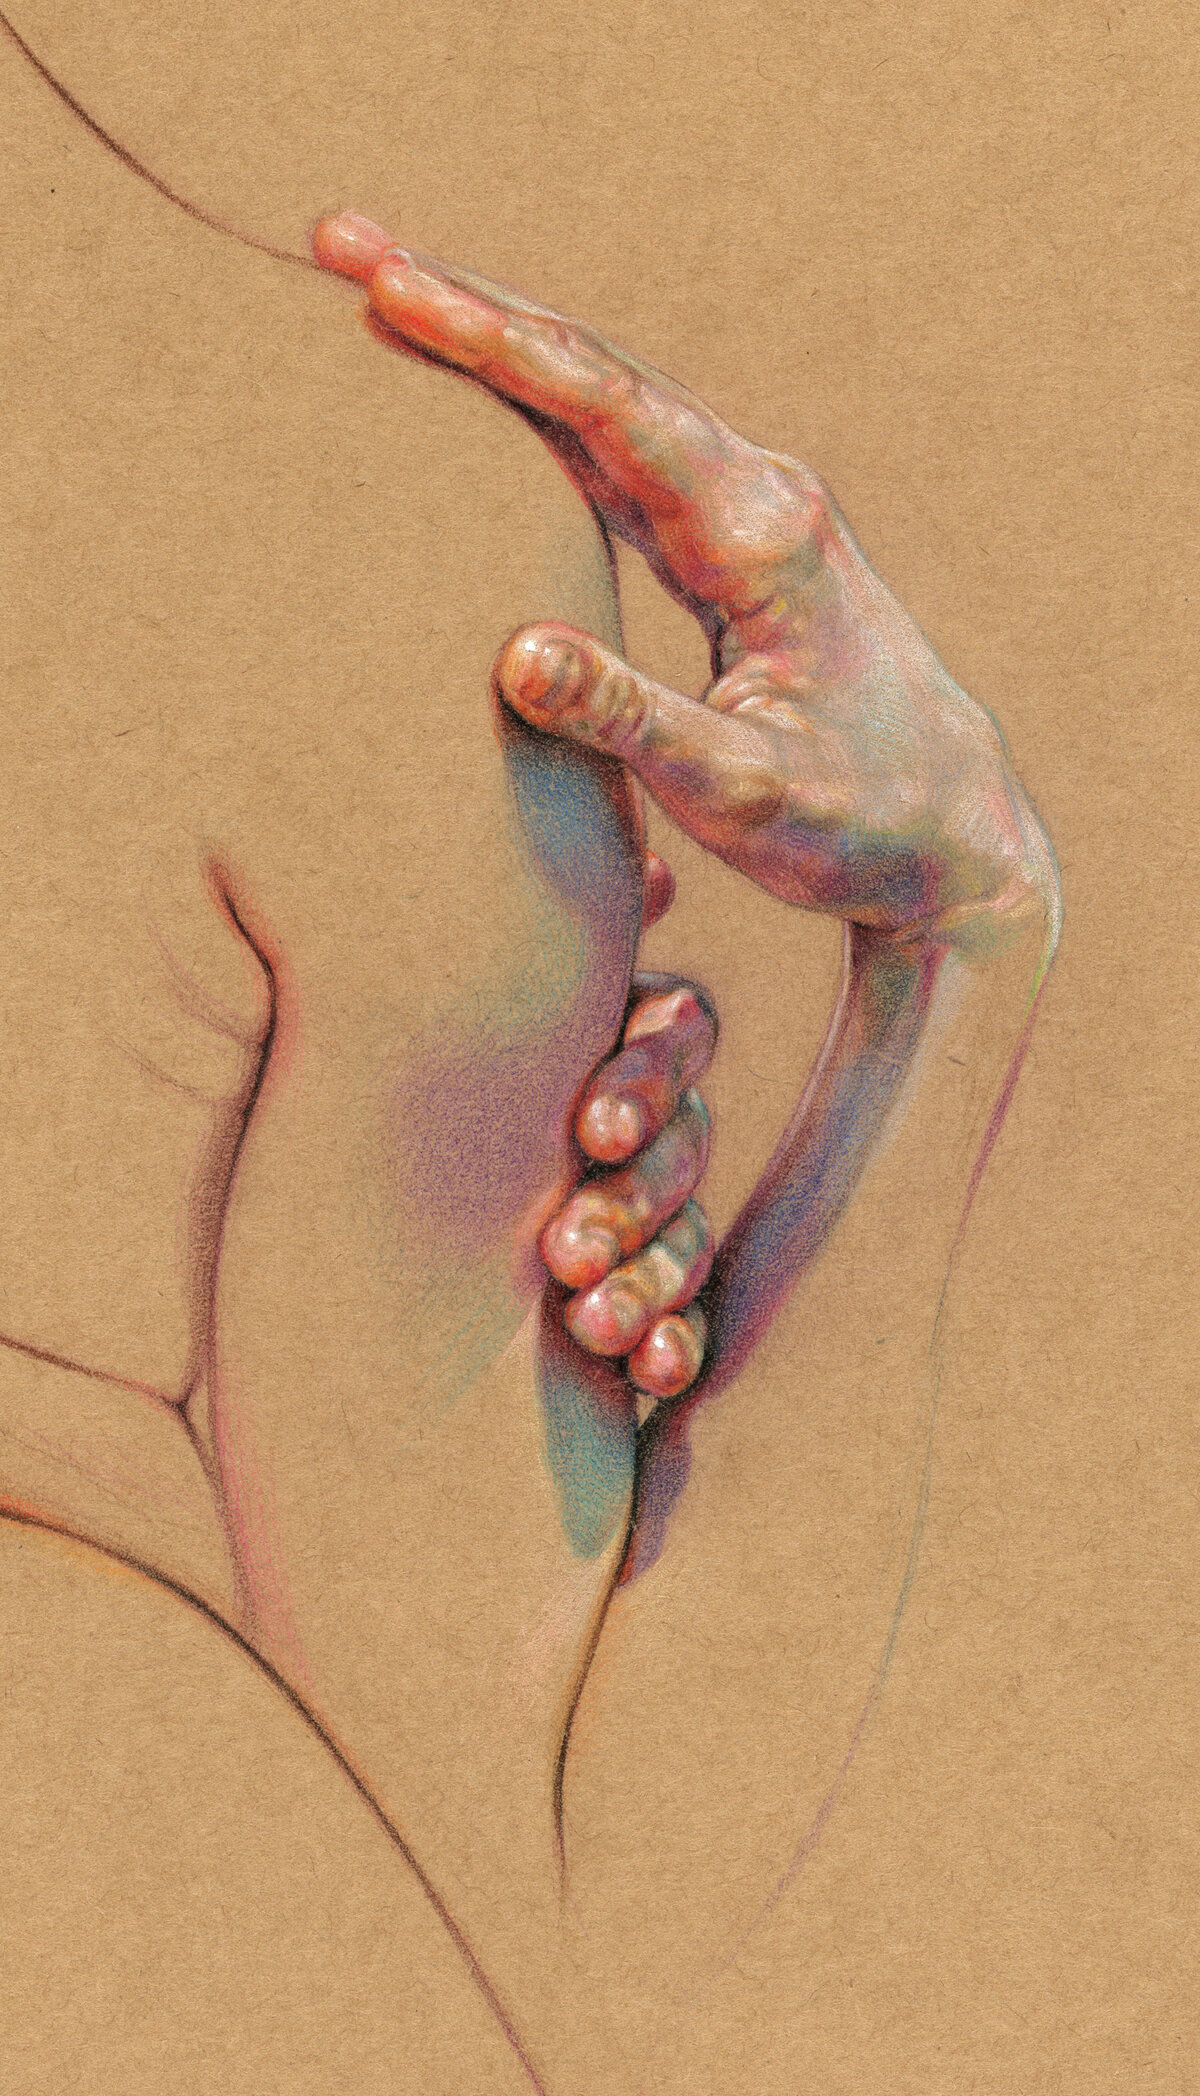 Expressive Anatomical Colored Pencil Drawings By Wanjin Gim 1